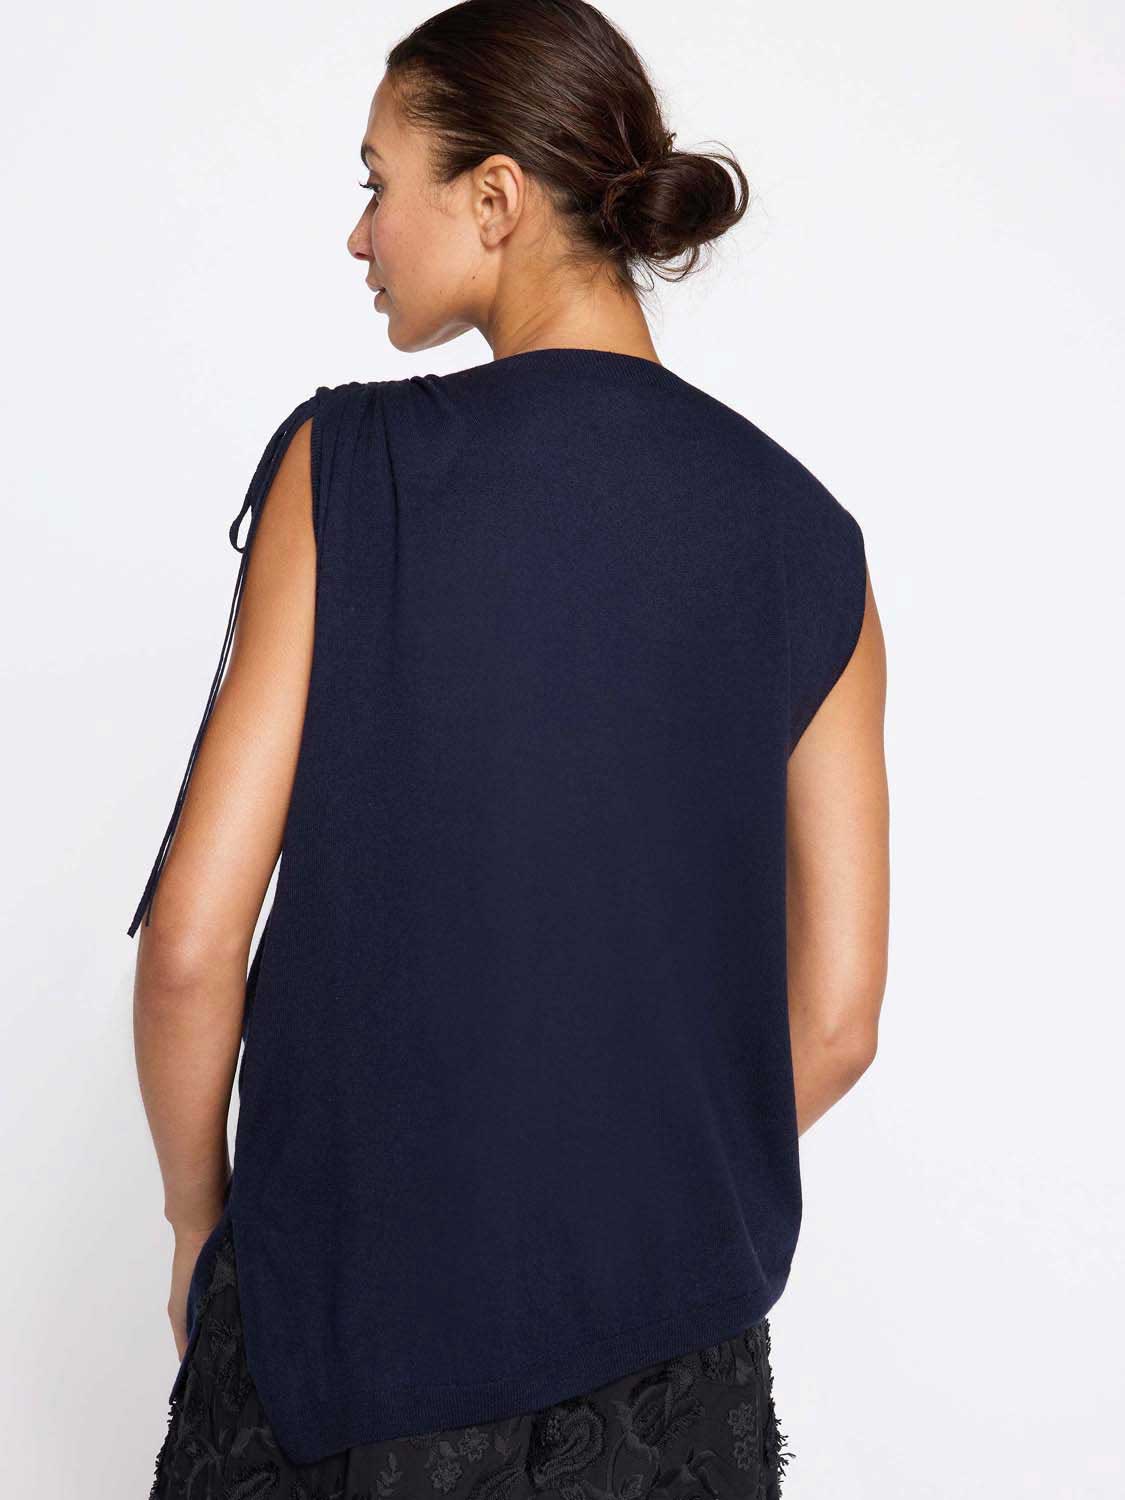 Vos sleeveless navy top back view